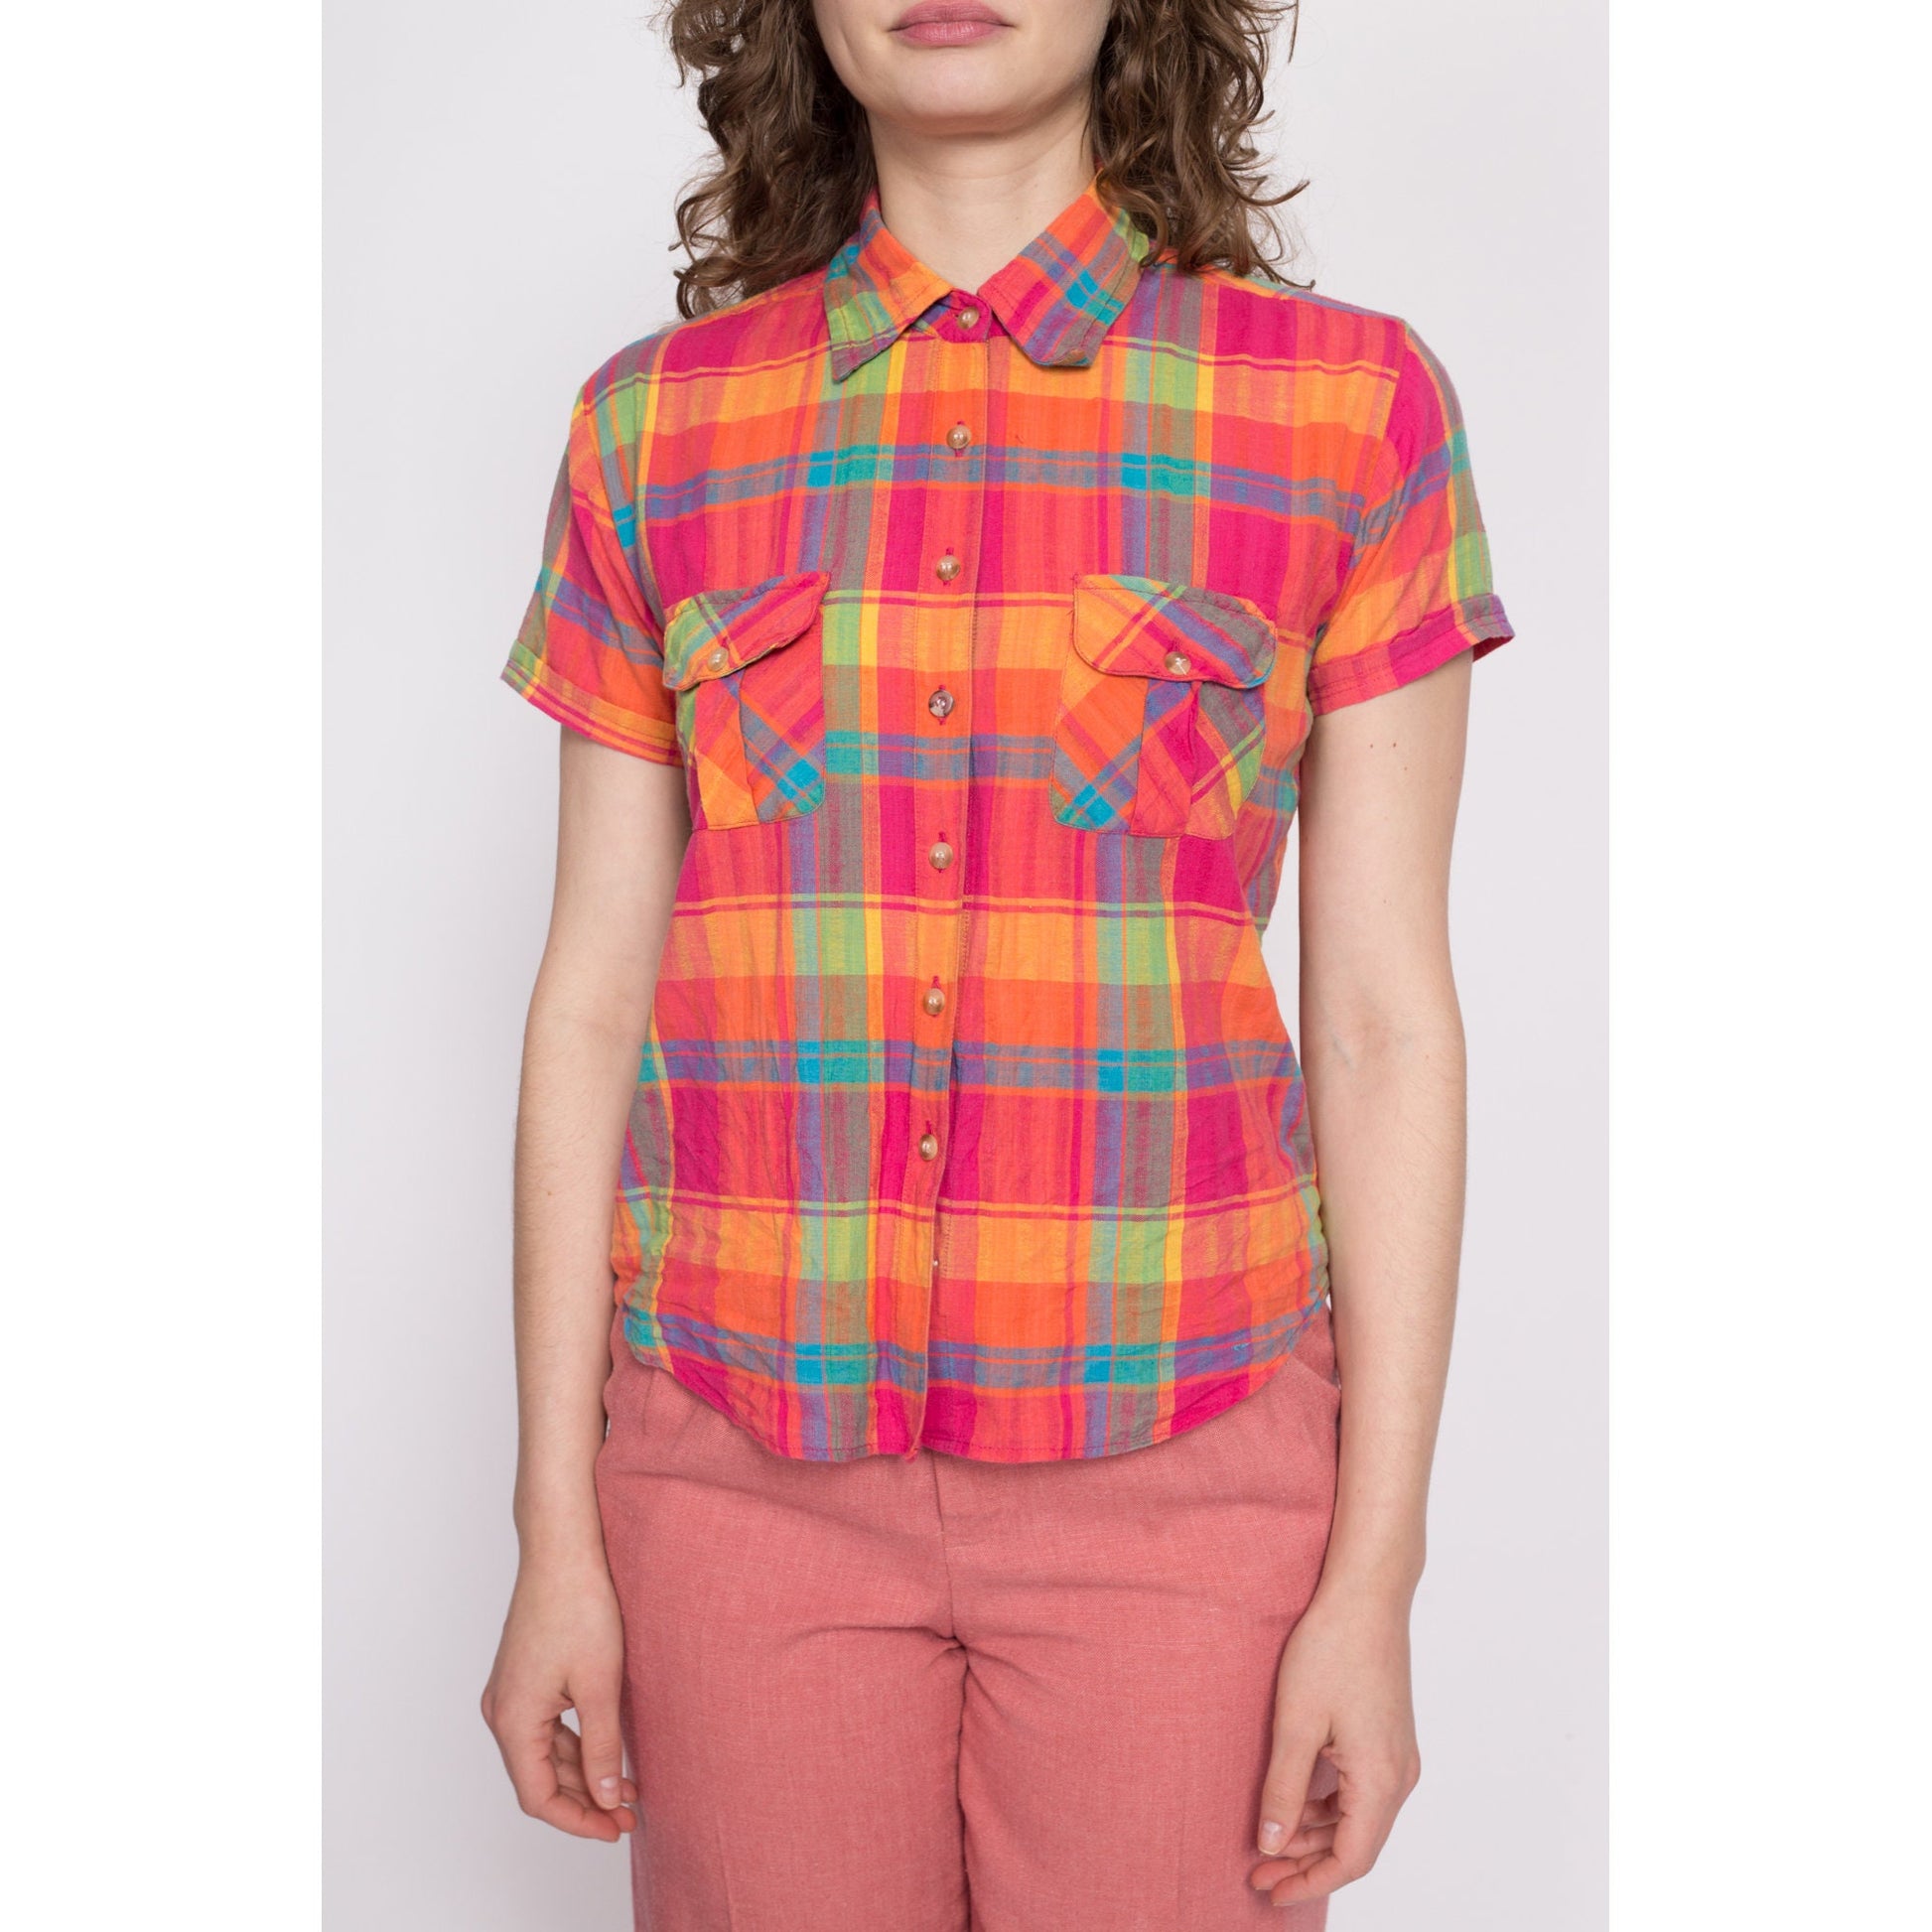 90s Pink Plaid Cotton Button Up Shirt - Medium | Vintage Colorful Short Sleeve Collared Top